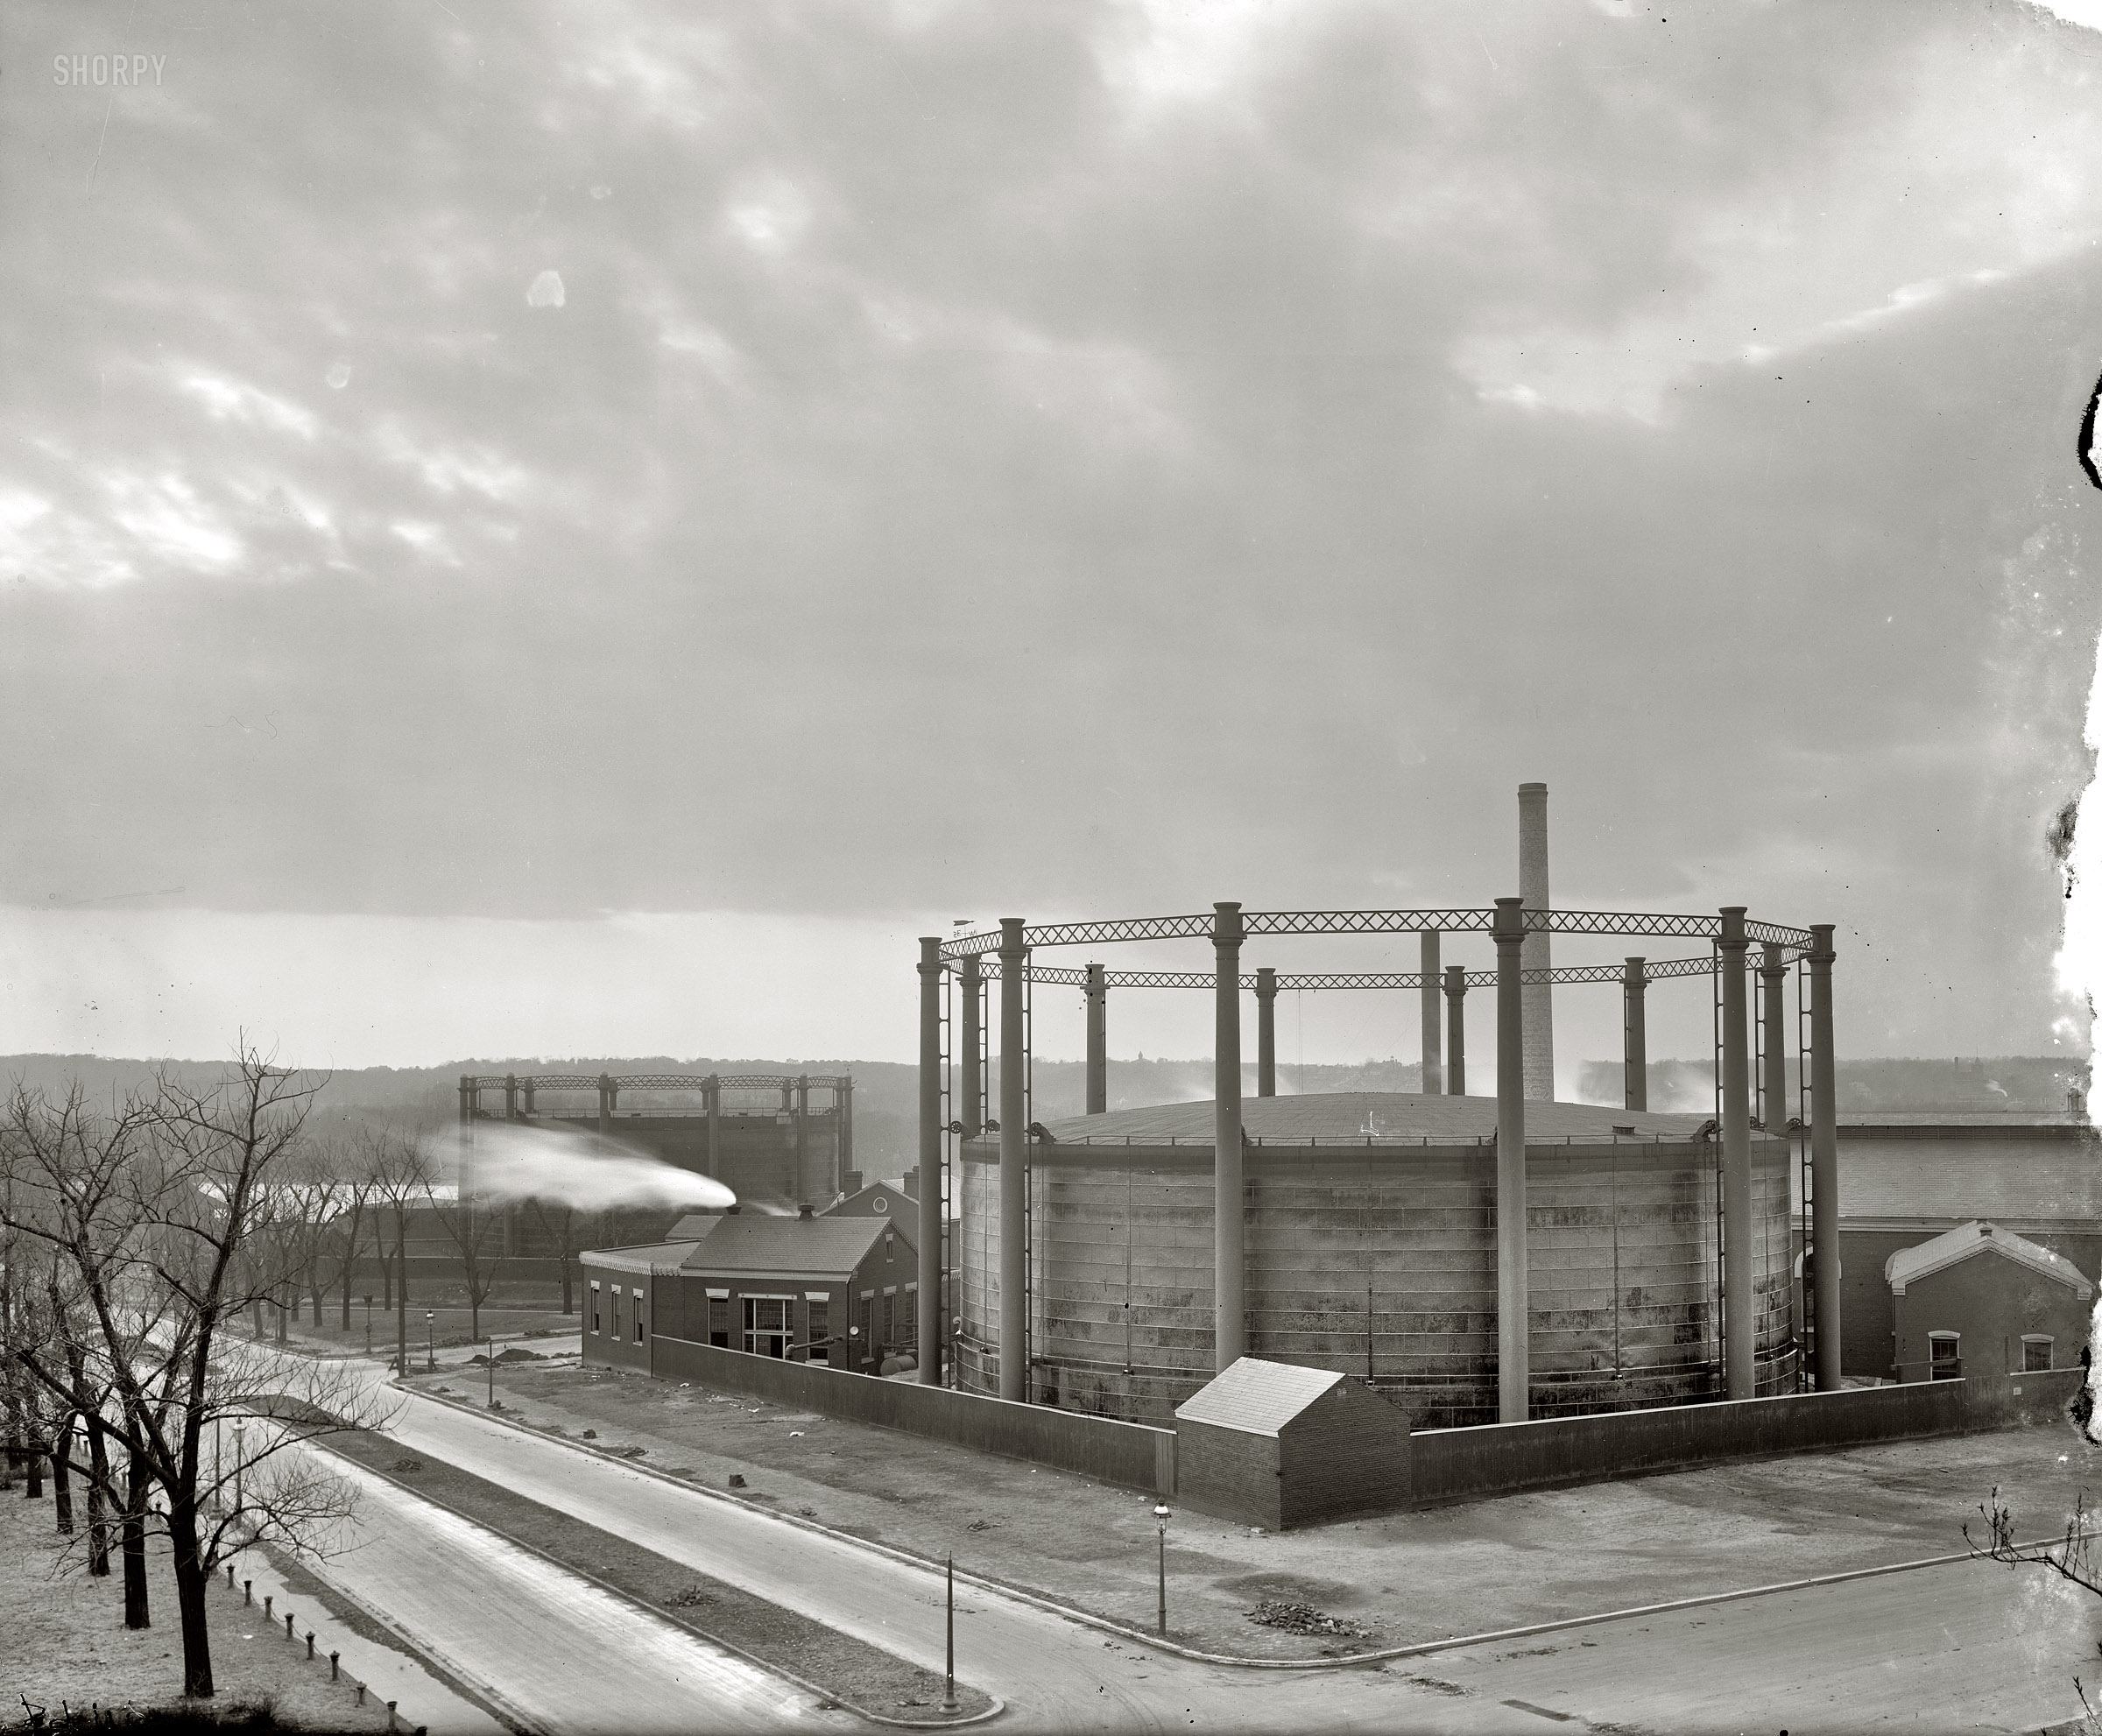 Washington, D.C., circa 1917. "Washington Gas Light holders at  26th and G streets N.W." These relics of the gaslight era ("two of Washington's biggest stinkers") were scrapped around 1947. Just about every city of any size in the latter half of the 19th century had its "gashouse district" -- a rough neighborhood dominated by smelly holding tanks for the municipal gas plant, where coal was gasified to make "city gas" (generally either "coal gas" or "water gas," depending on the process) for illumination. Harris & Ewing Collection glass negative. View full size.